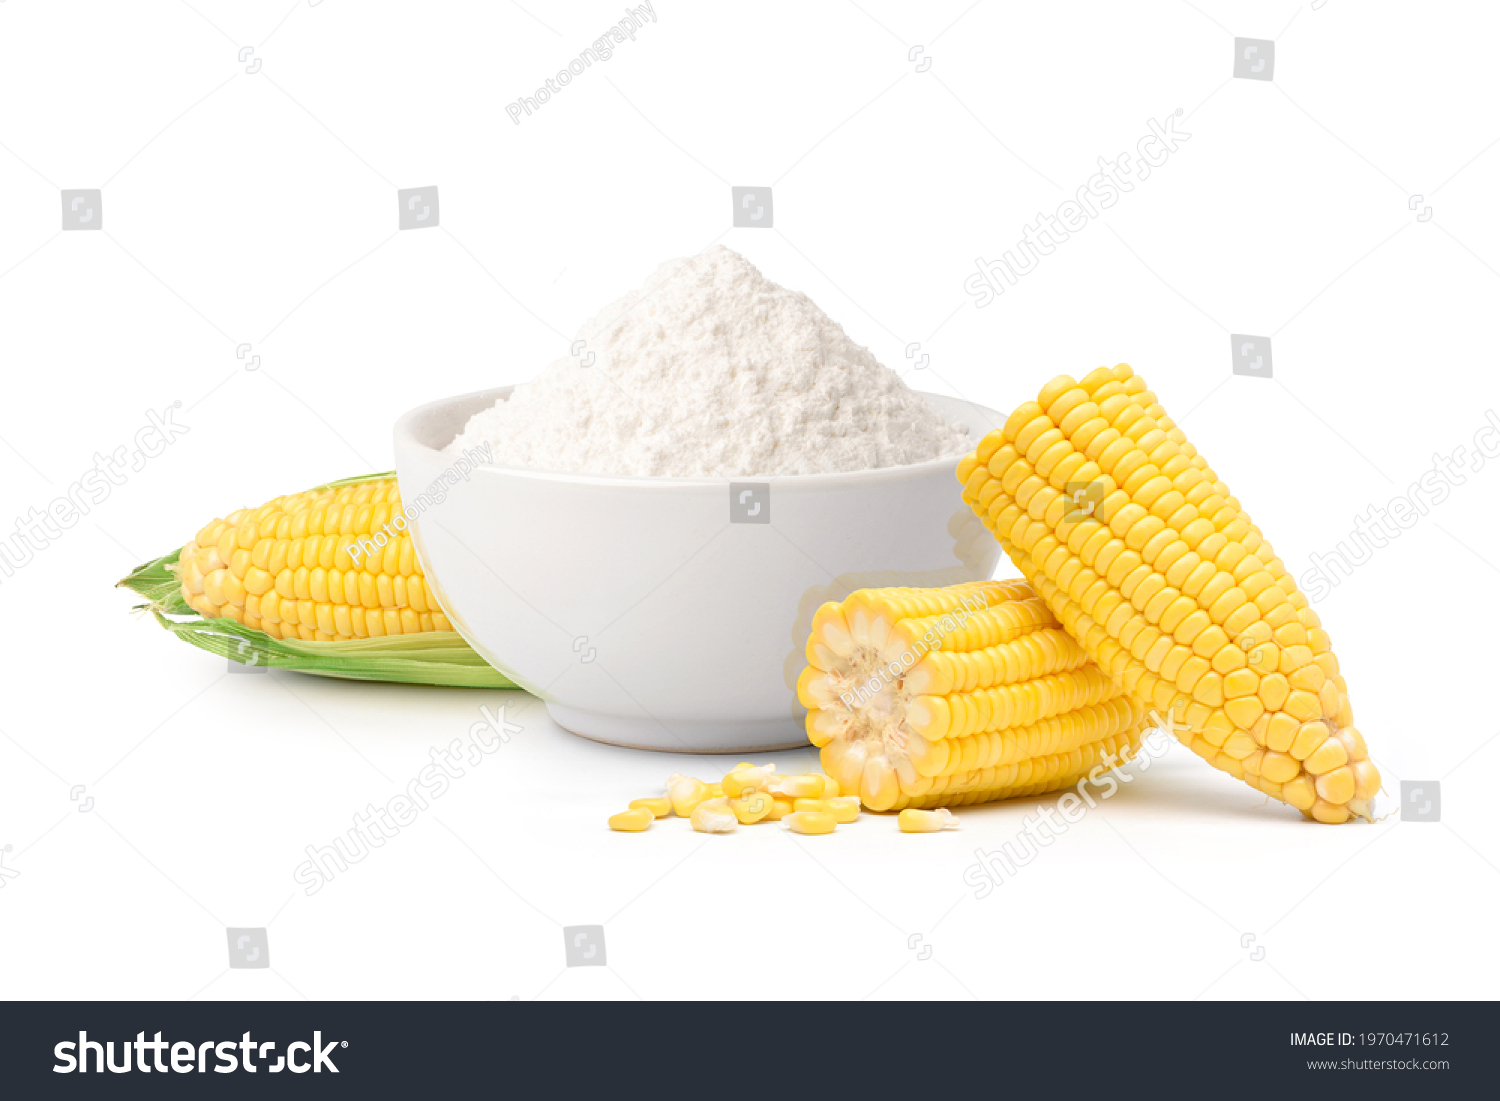 Corn starch with fresh corn isolated on white background. #1970471612